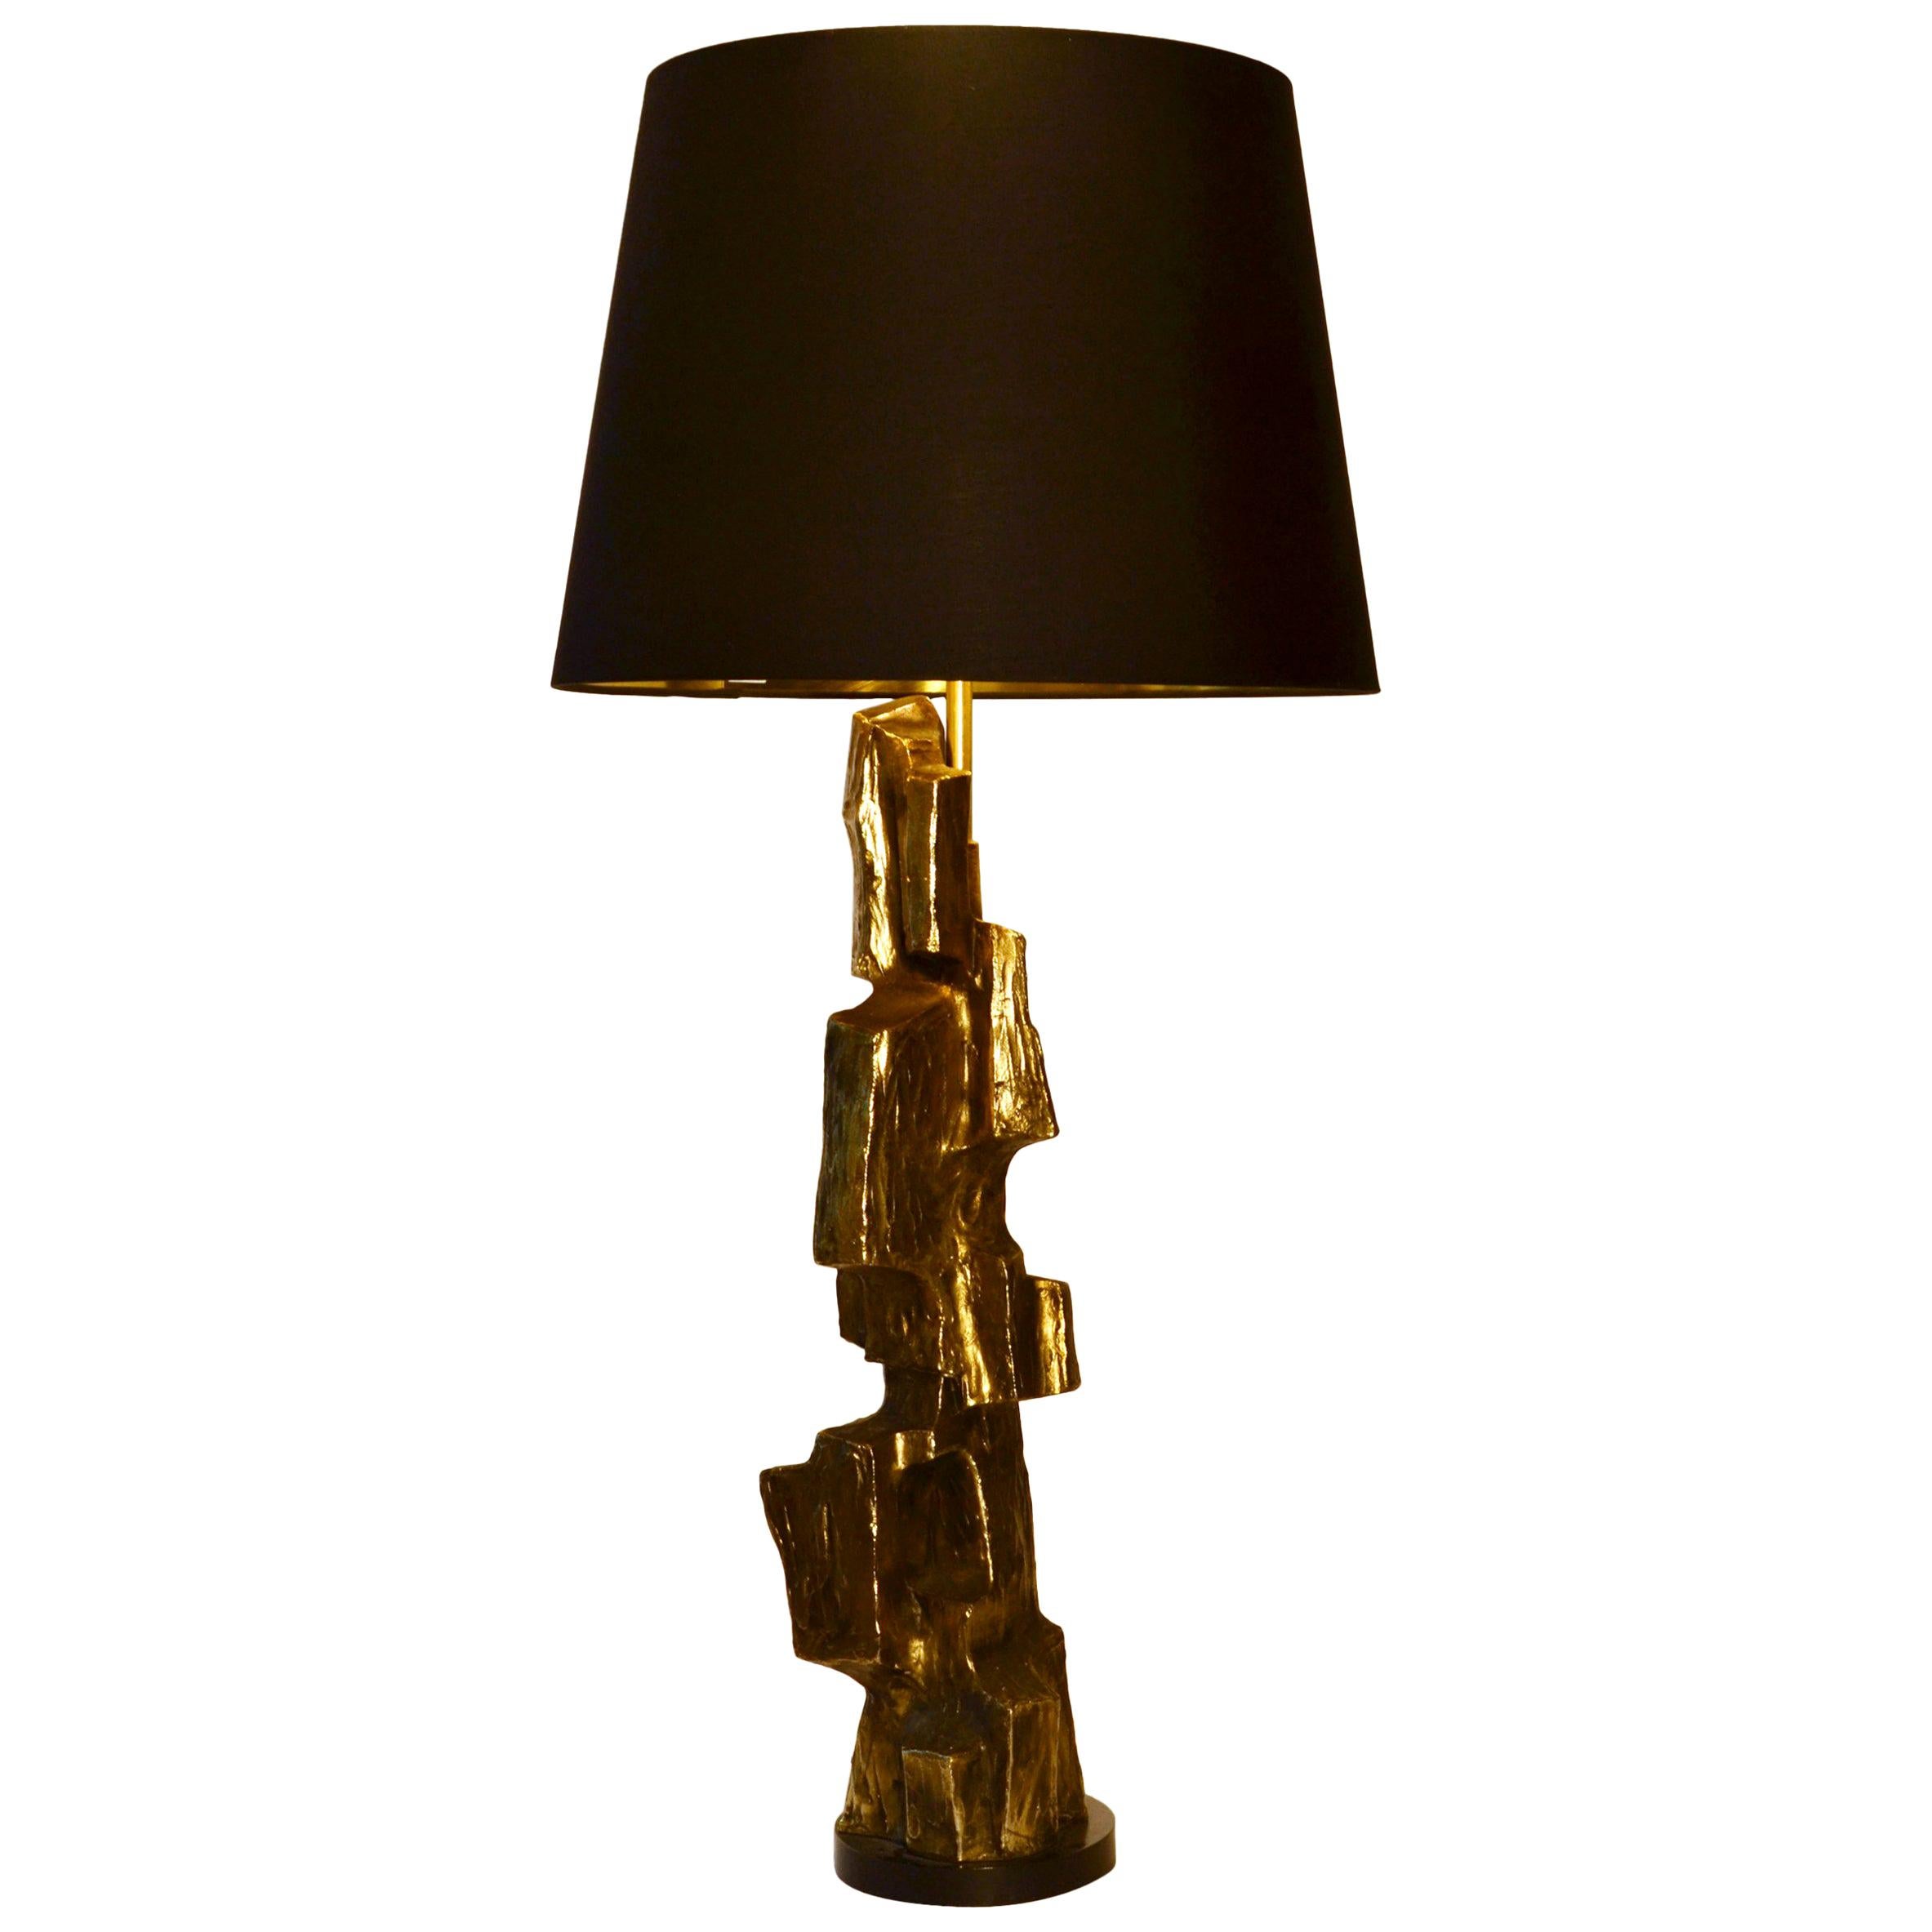 Large Brutalist Sculptural Table Lamp attributed to Tempestini